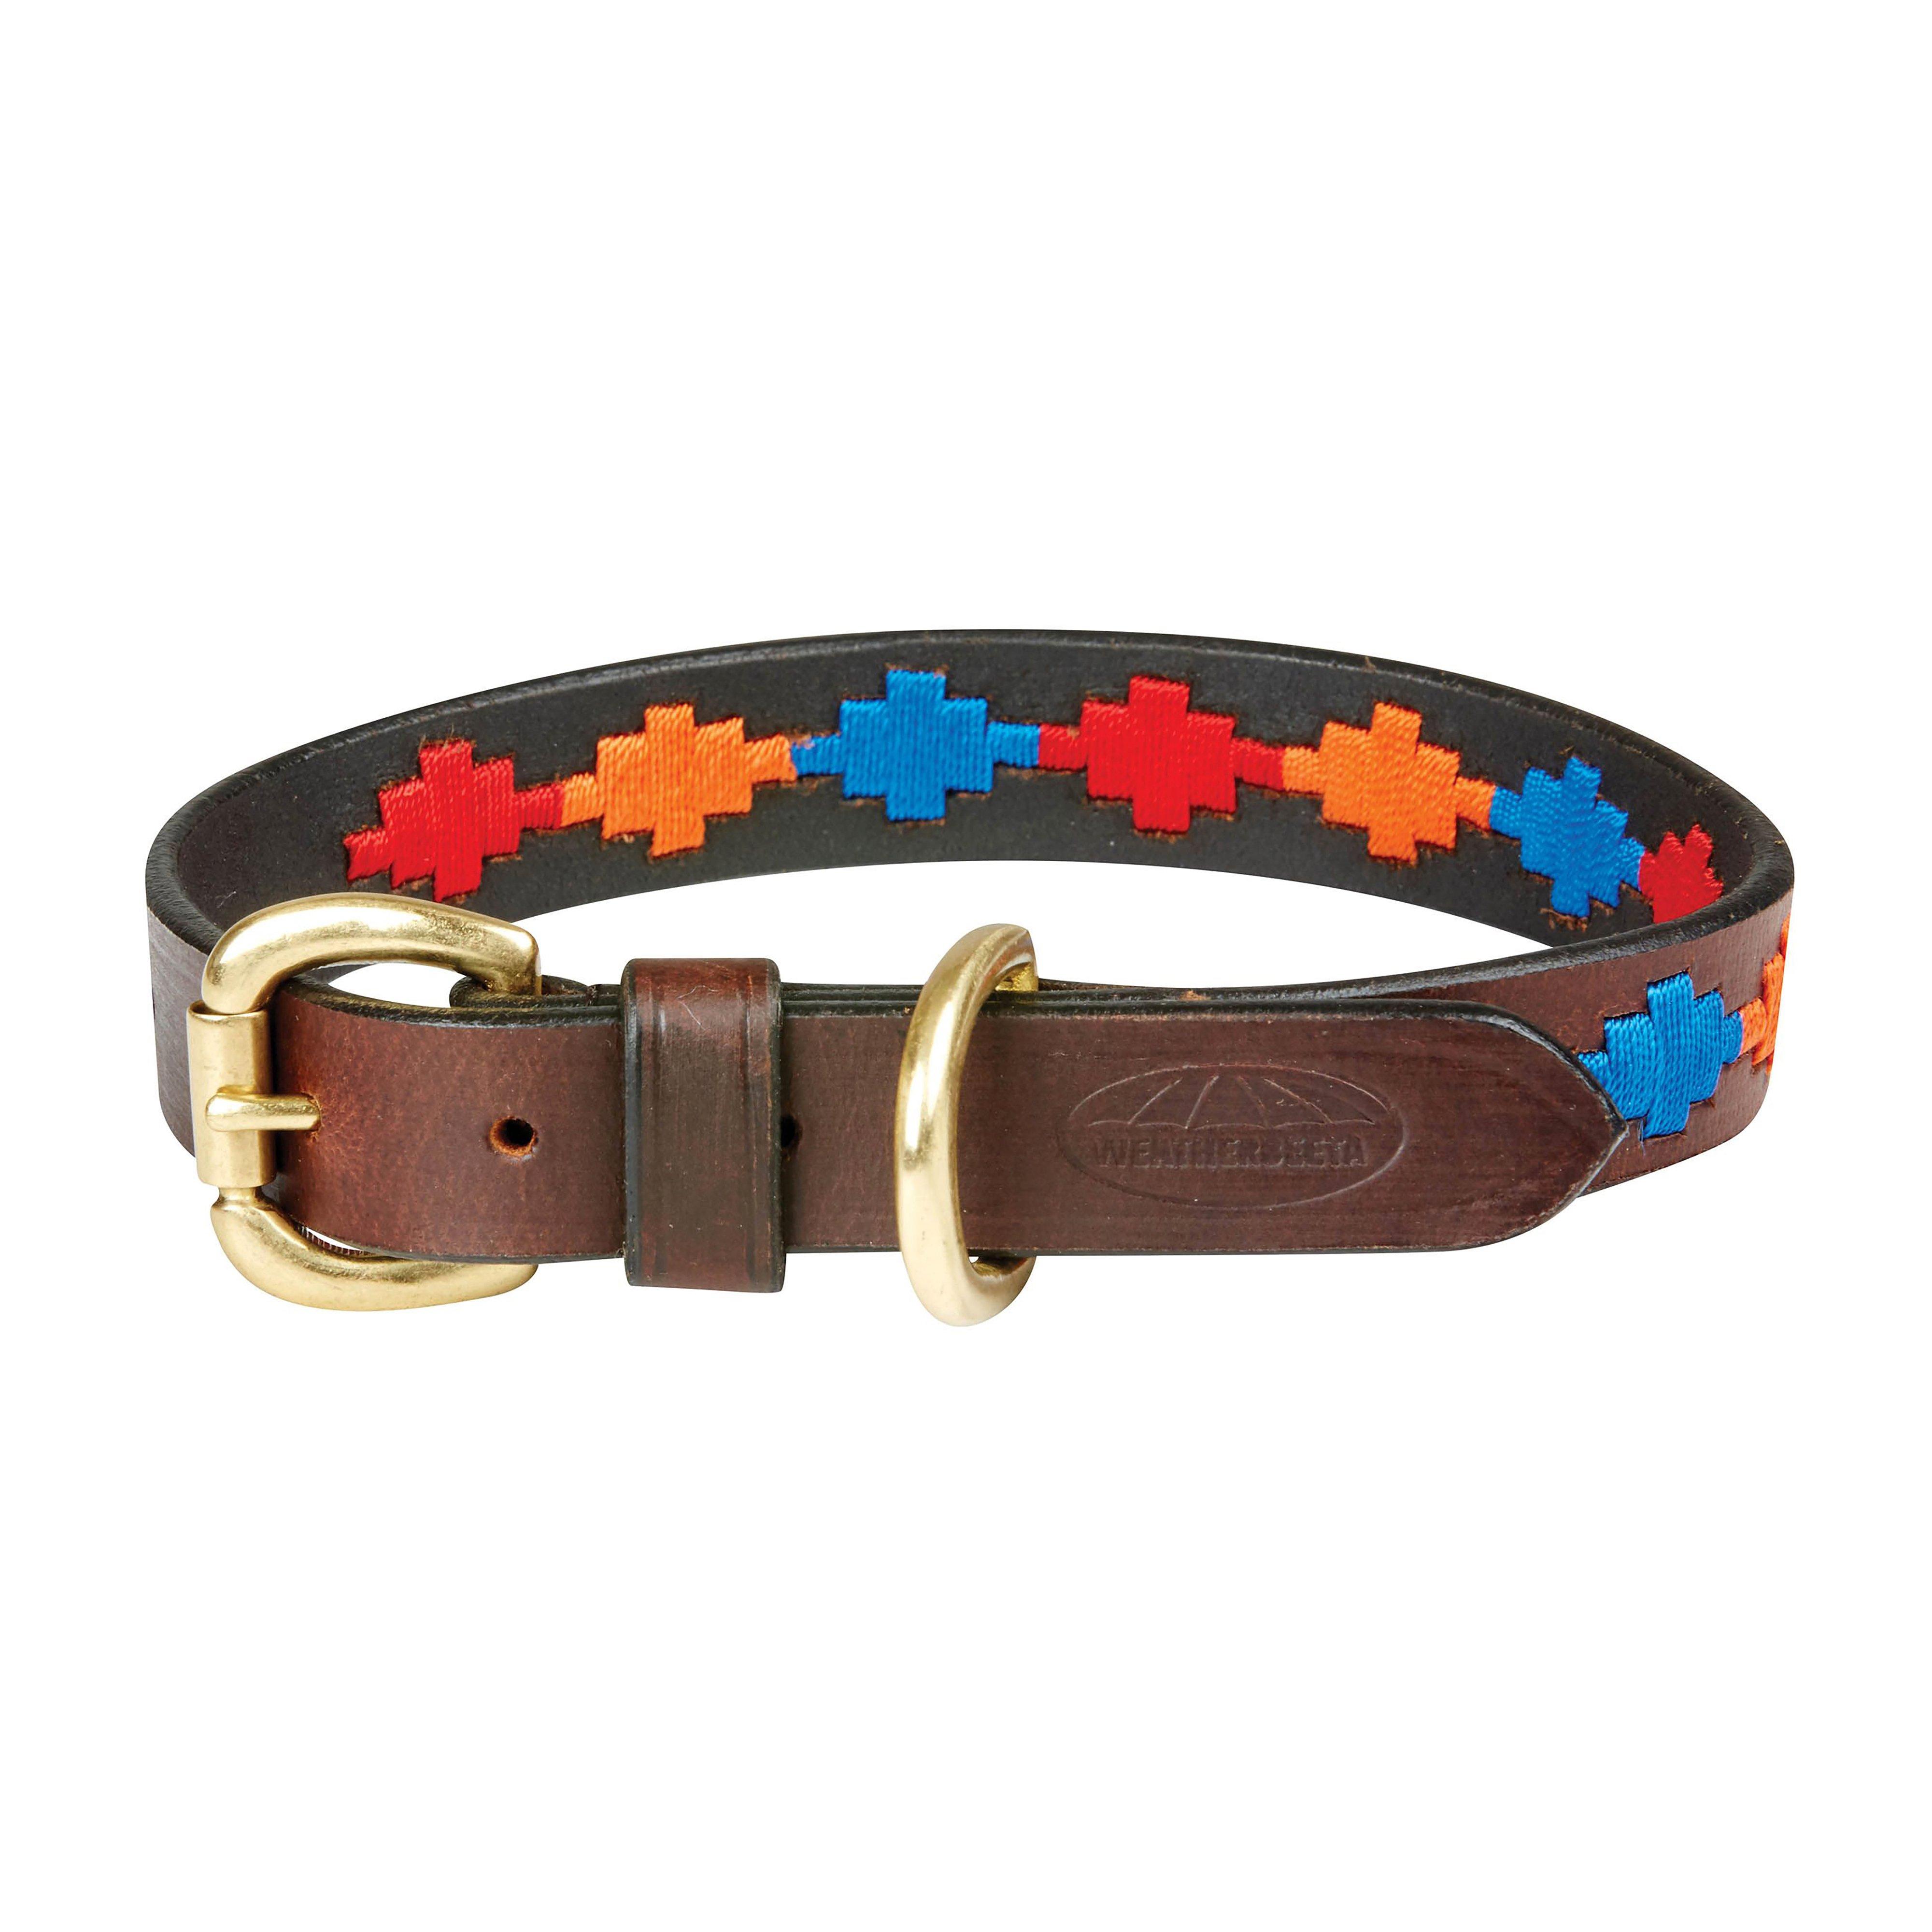 Polo Leather Collar Beaufort Brown/Red/Orange/Blue